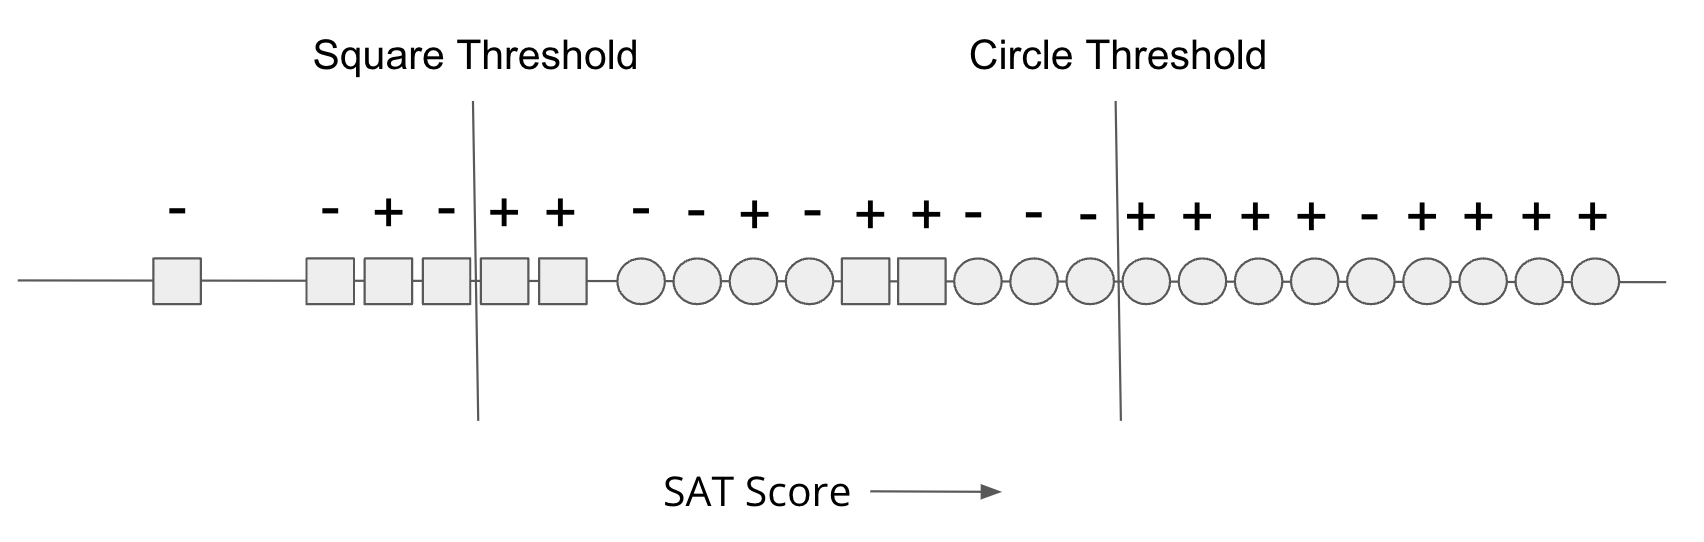 A numberline of circles and squares based on SAT score (described above) separate thresholds